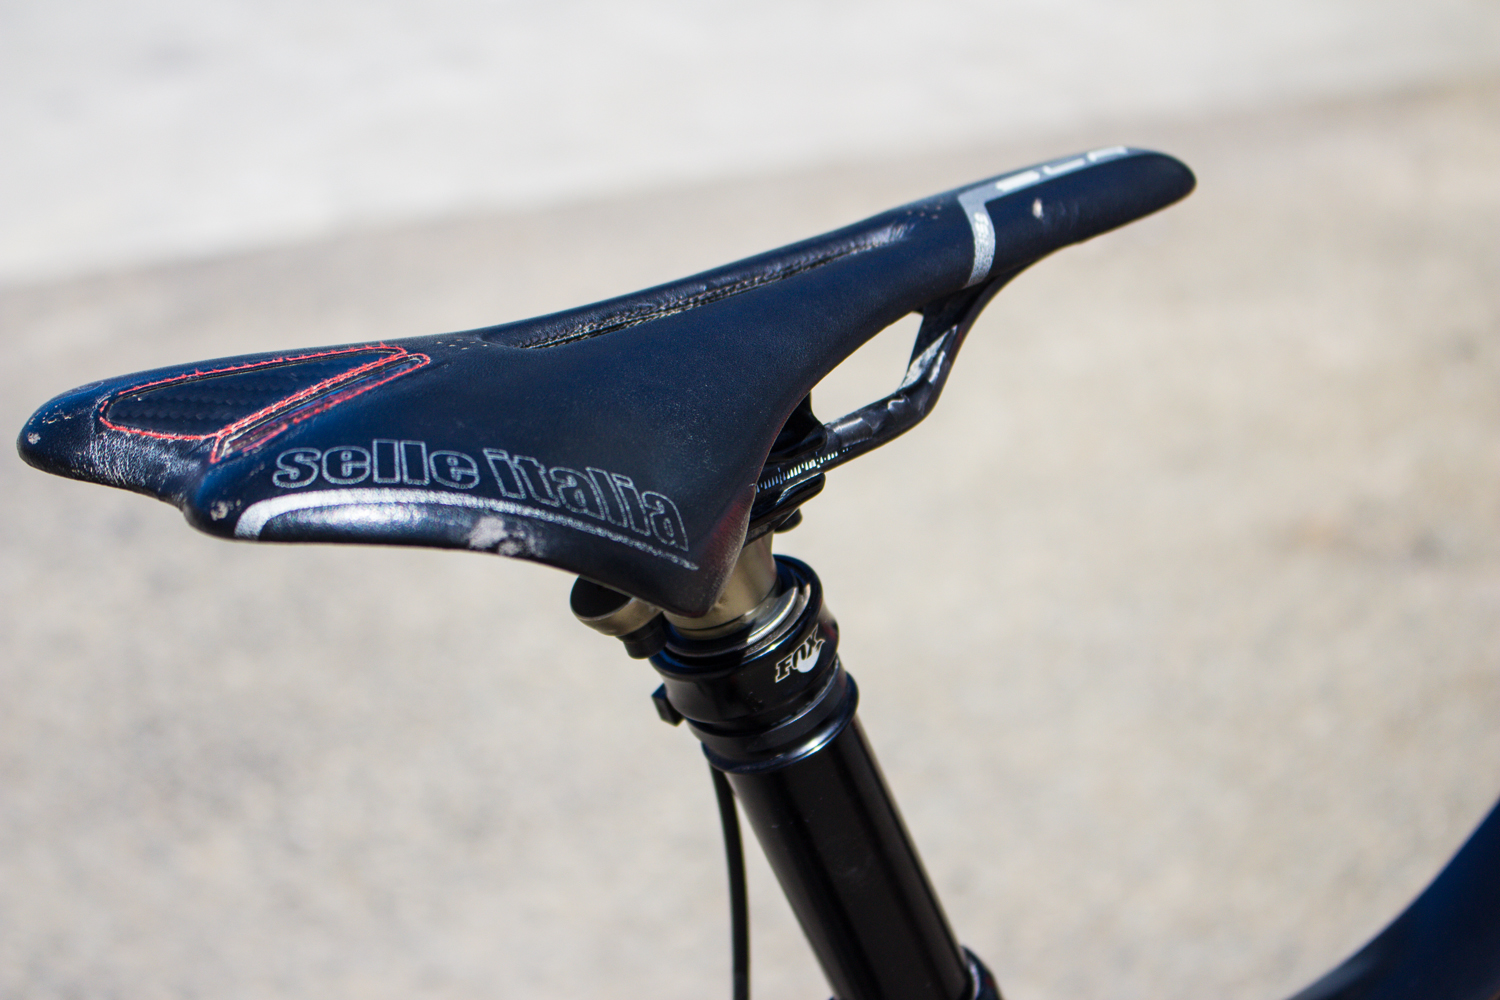 Selle Italia SLR with carbon rails atop the Fox D.O.S.S seat post.